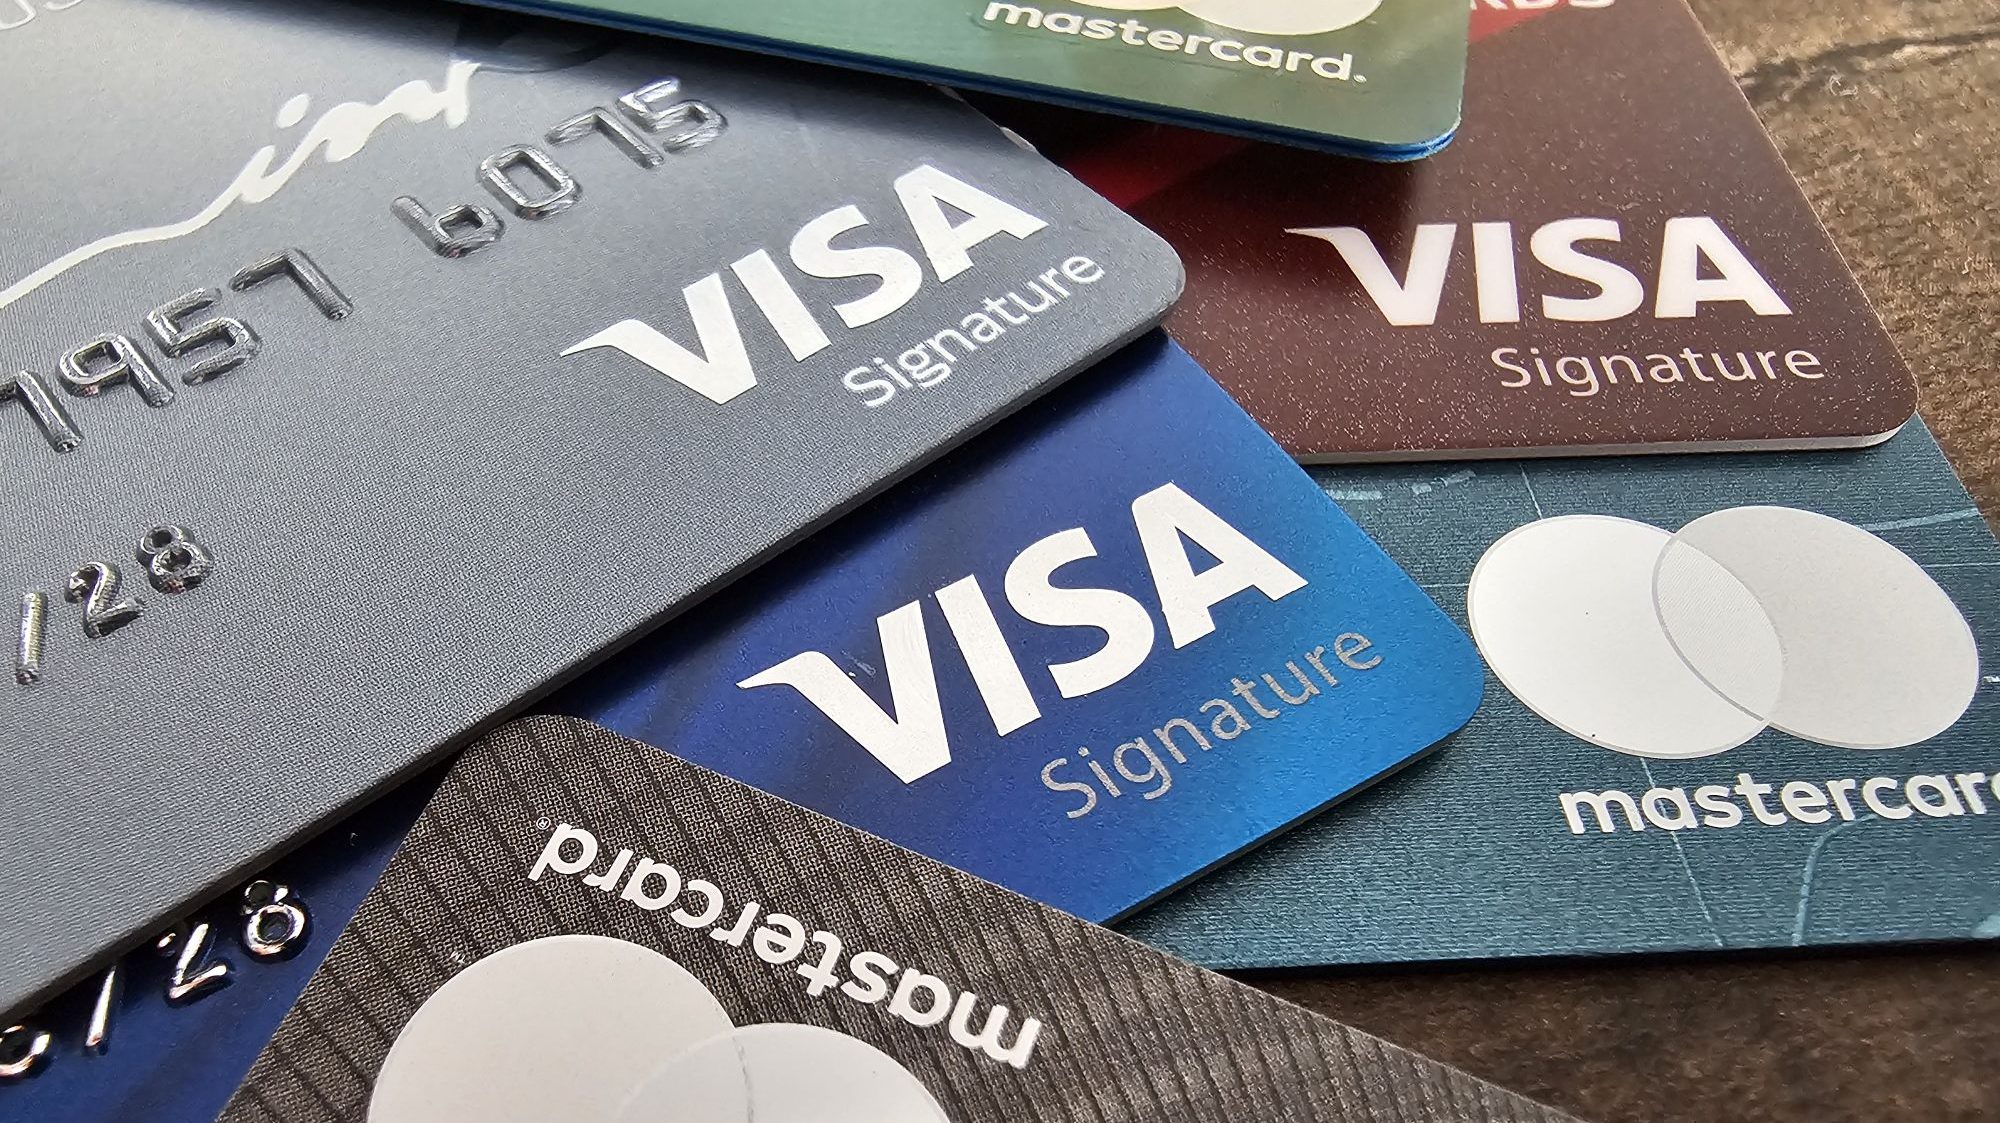 Visa and Mastercard Settle Antitrust Suit, Agree to Lower Credit Card Fees